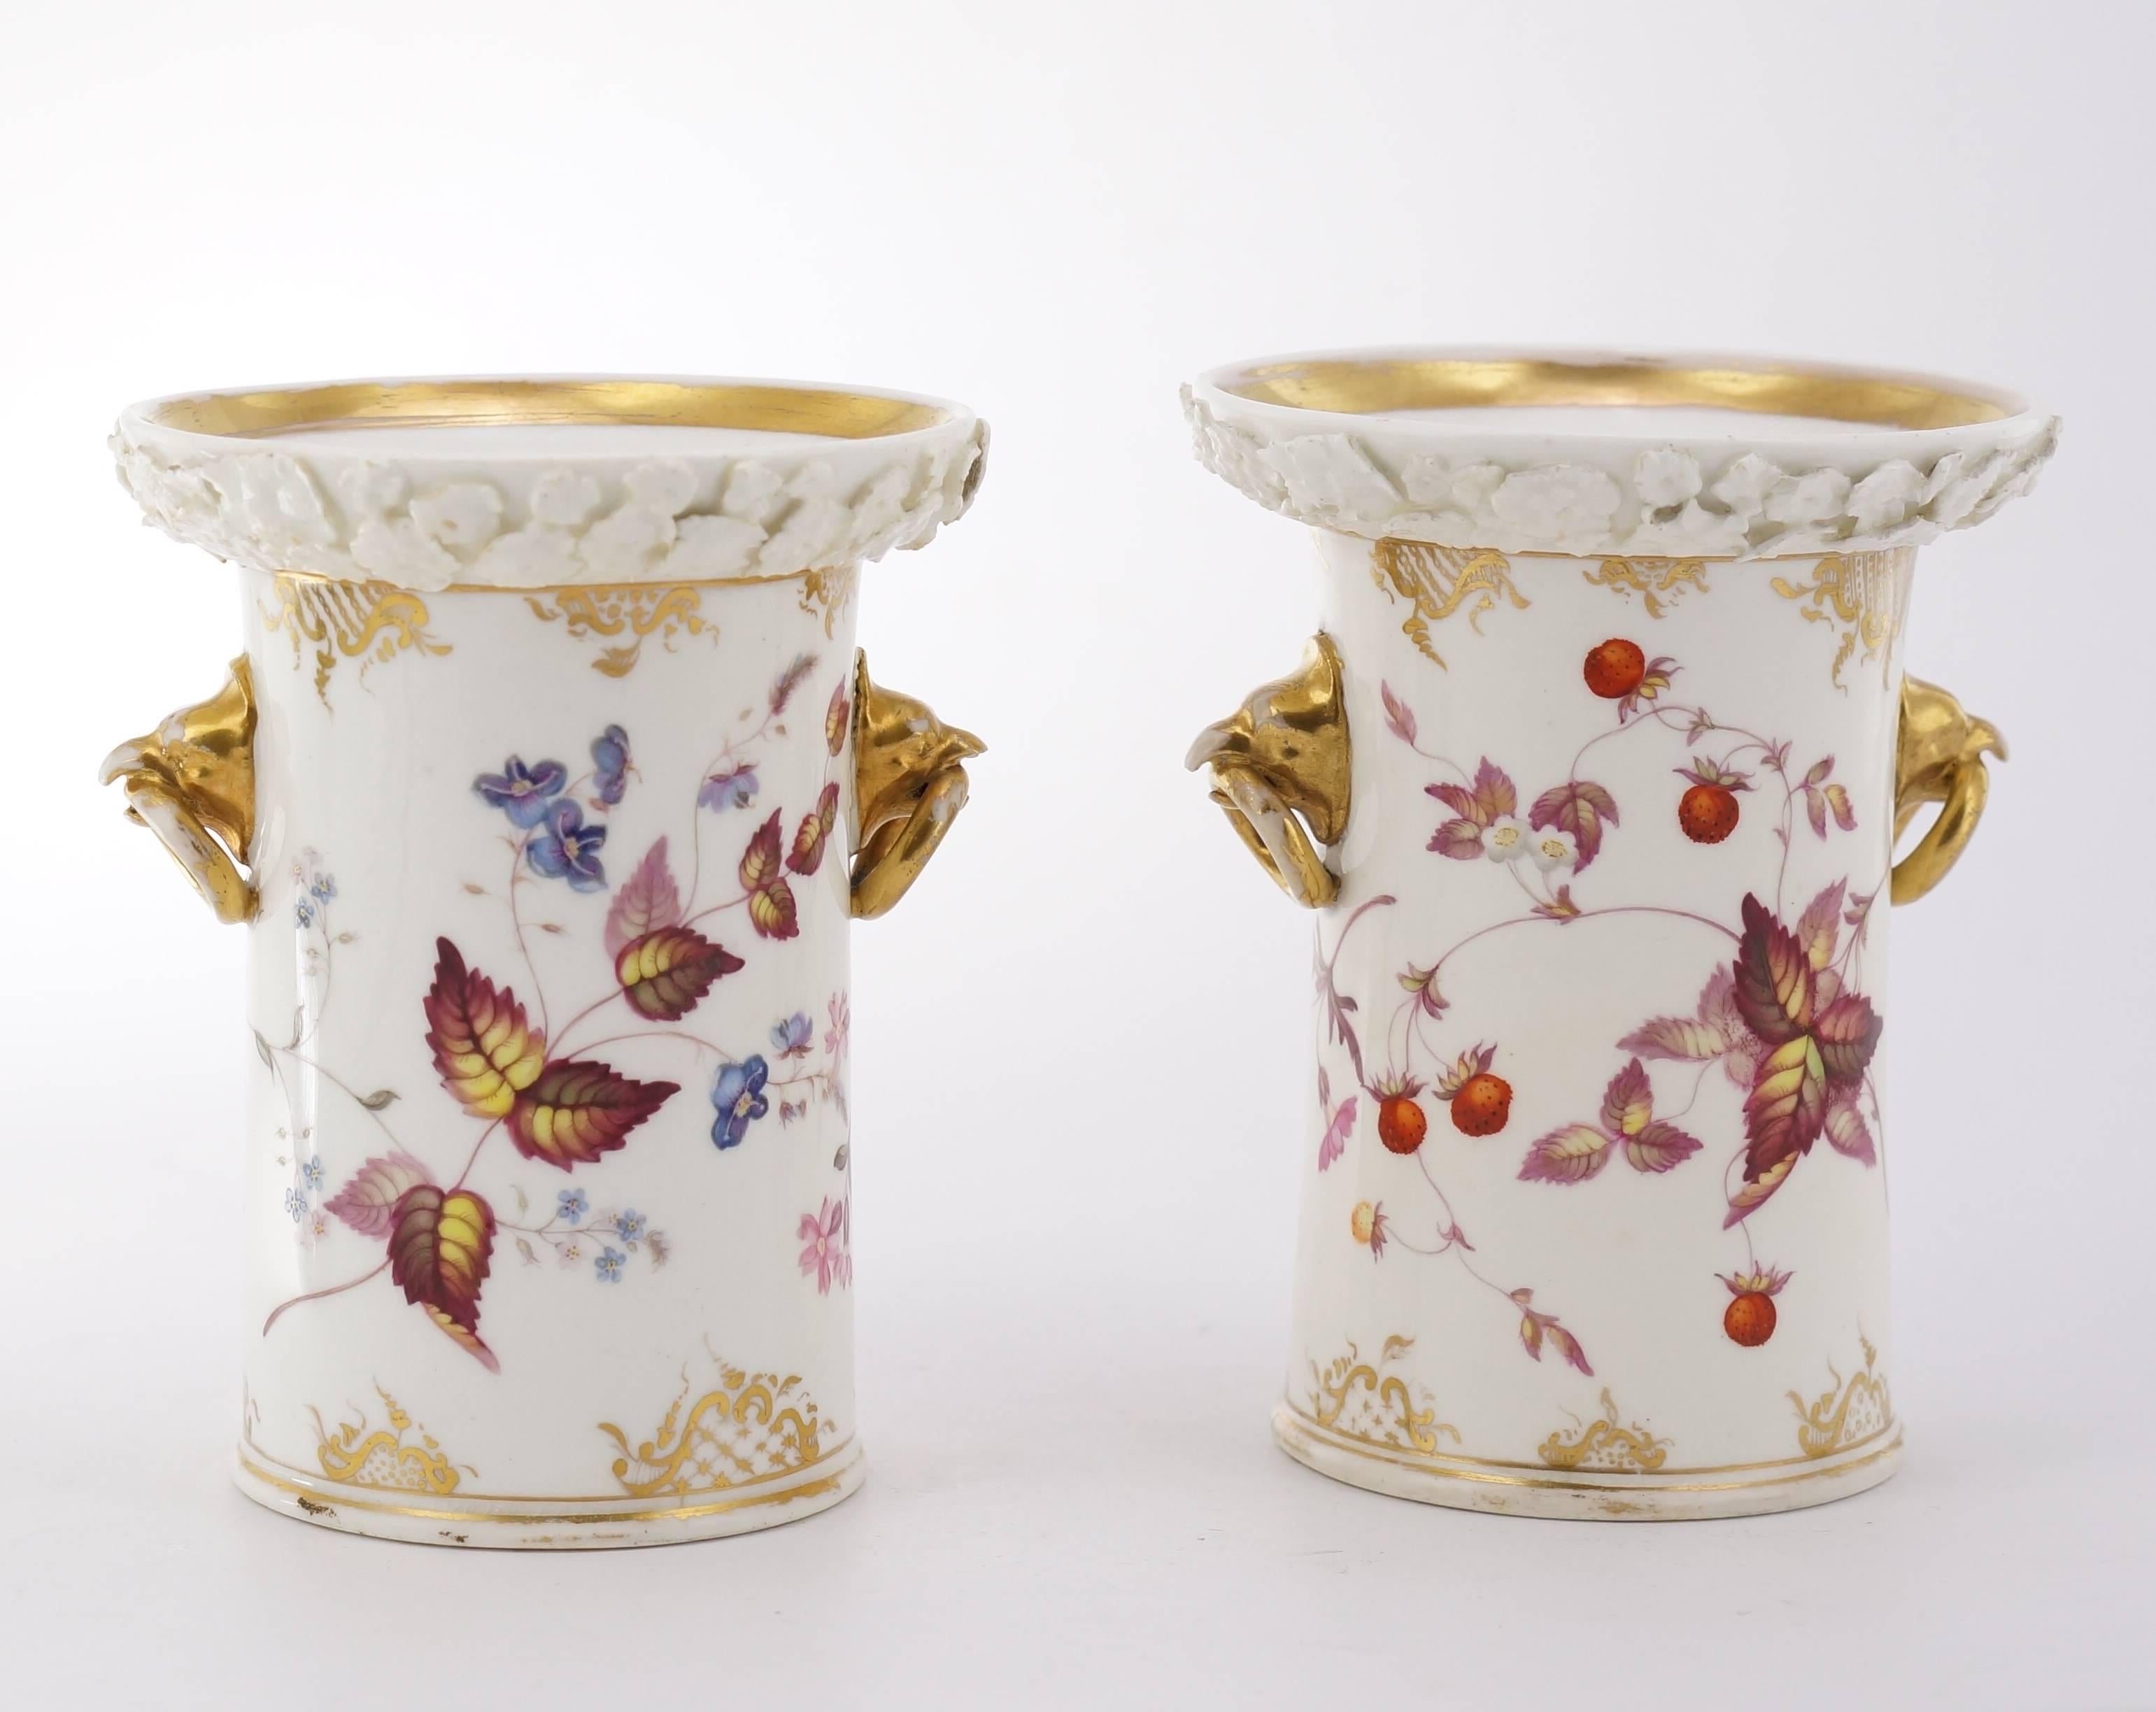 Pair of remarkable coalport spill vases, the straight sided forms painted with wild strawberries and dog roses, the handles modelled as birds heads with rings in their beaks, the rims with encrusted daisy heads left in the white.
Unmarked, circa